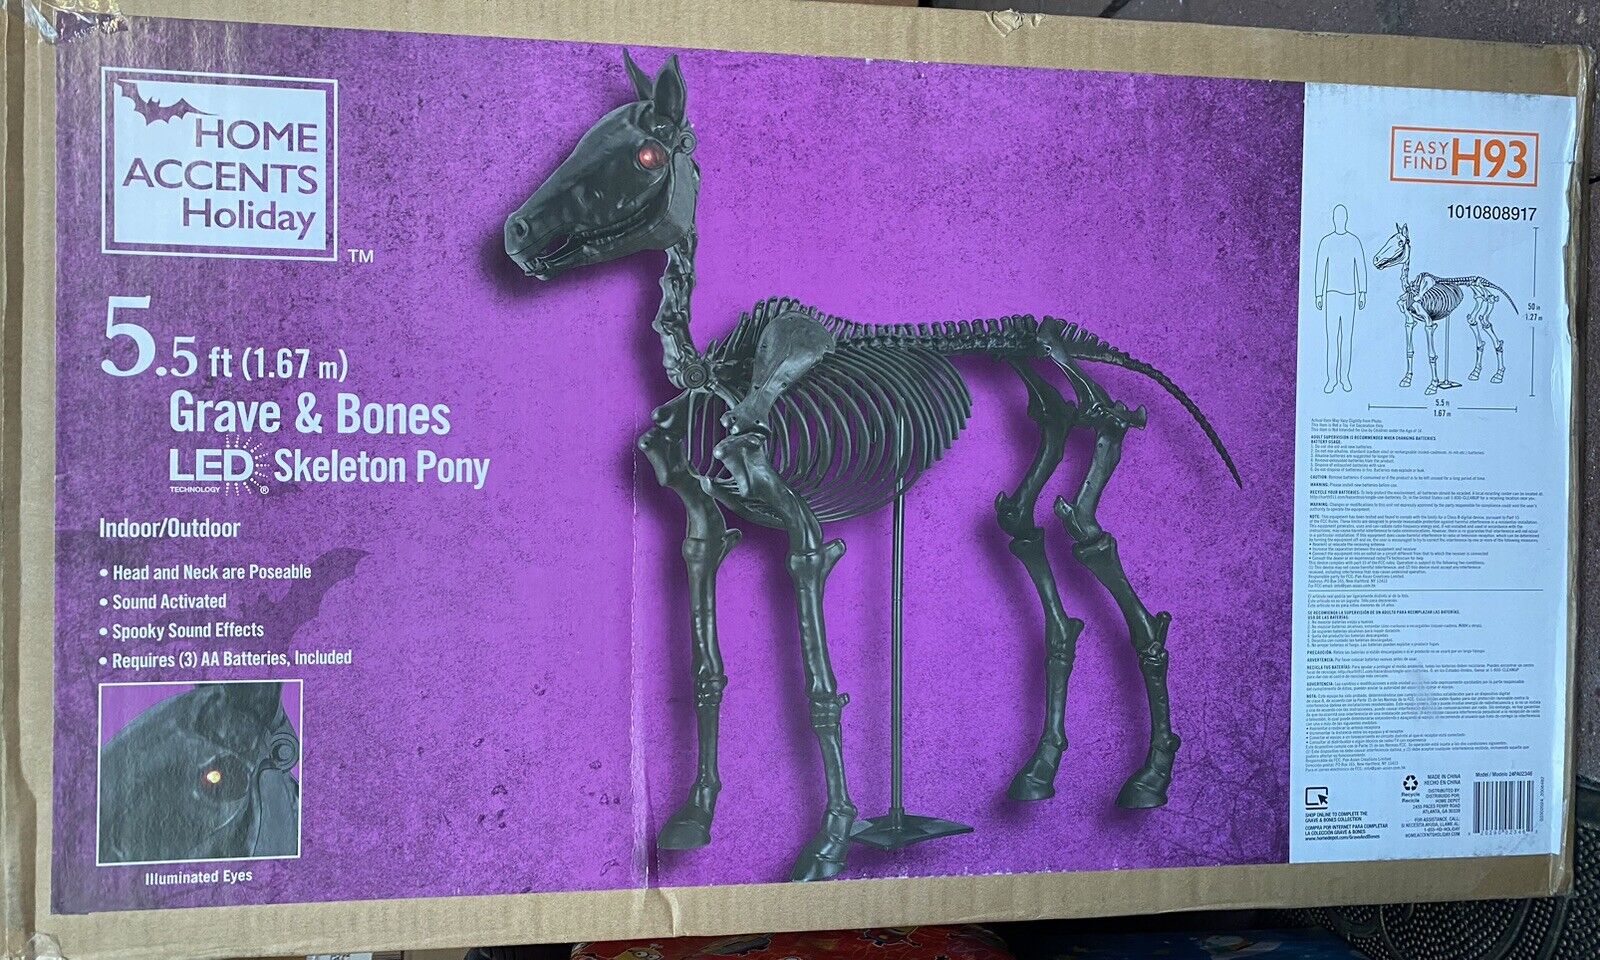 5.5 ft LED Skeleton Pony Halloween Home Depot Horse Home Accents - IN HAND